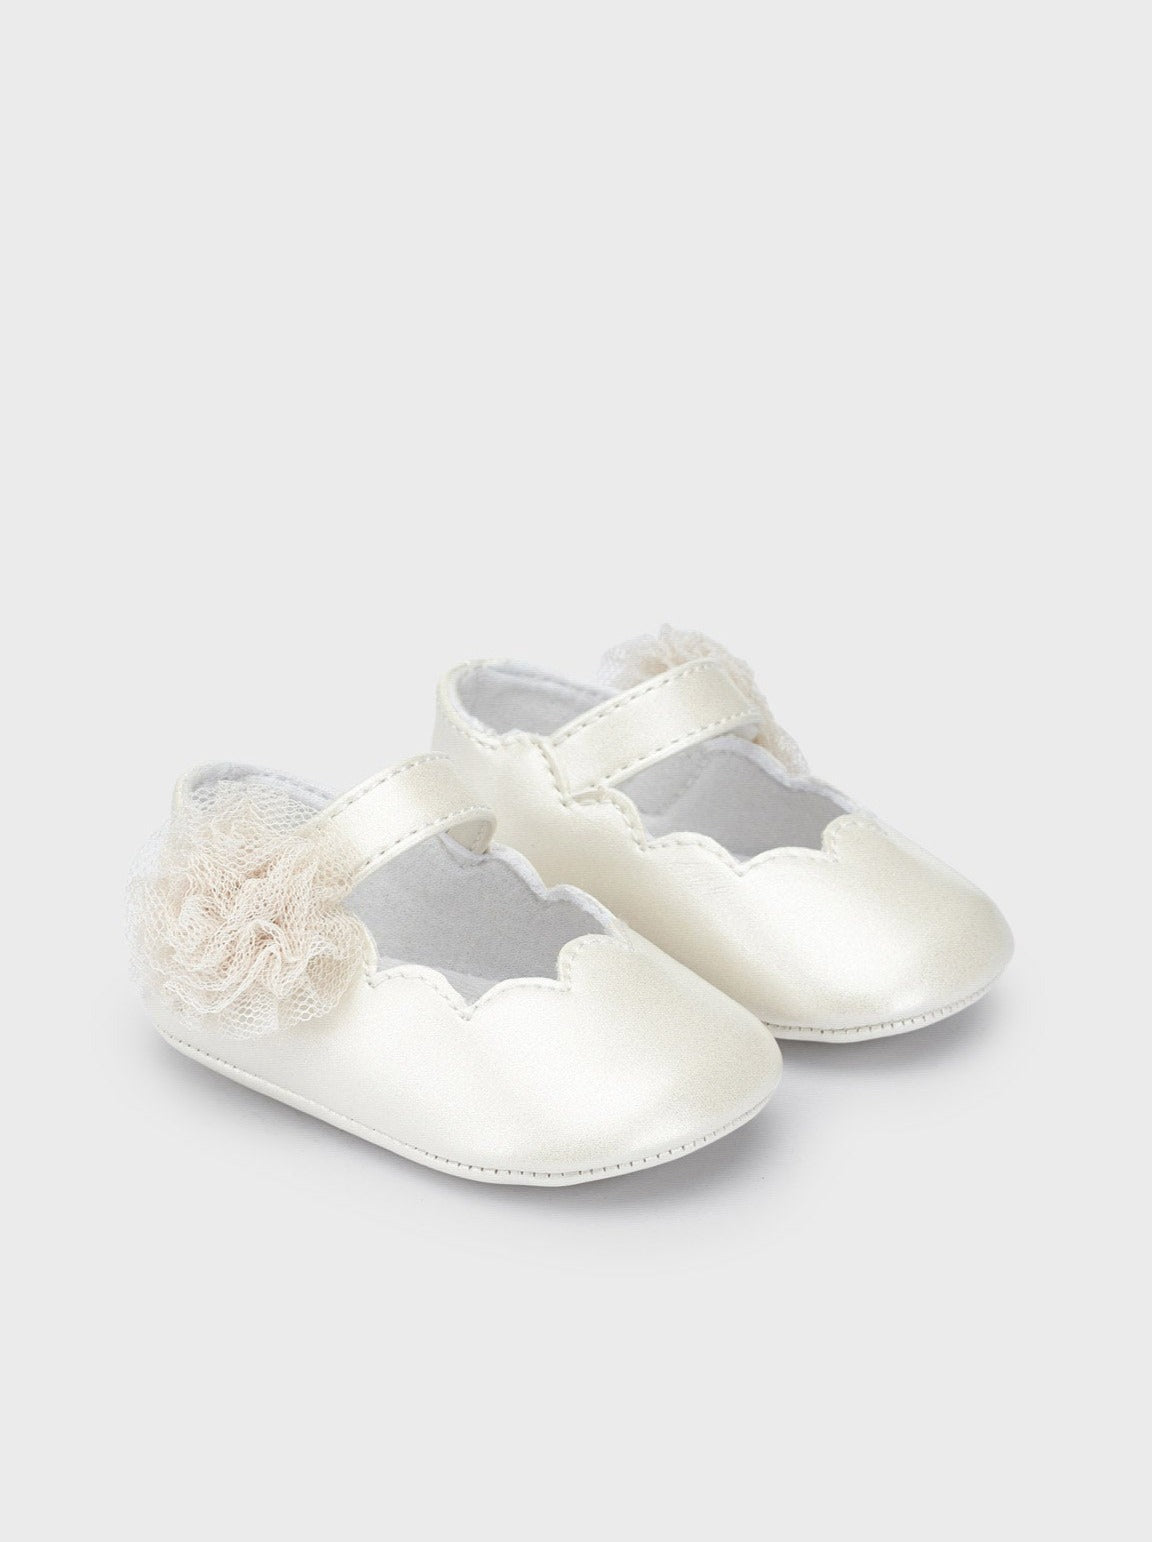 Mayoral Baby Dressy Mary Jane Shoes  Off White_9570-020